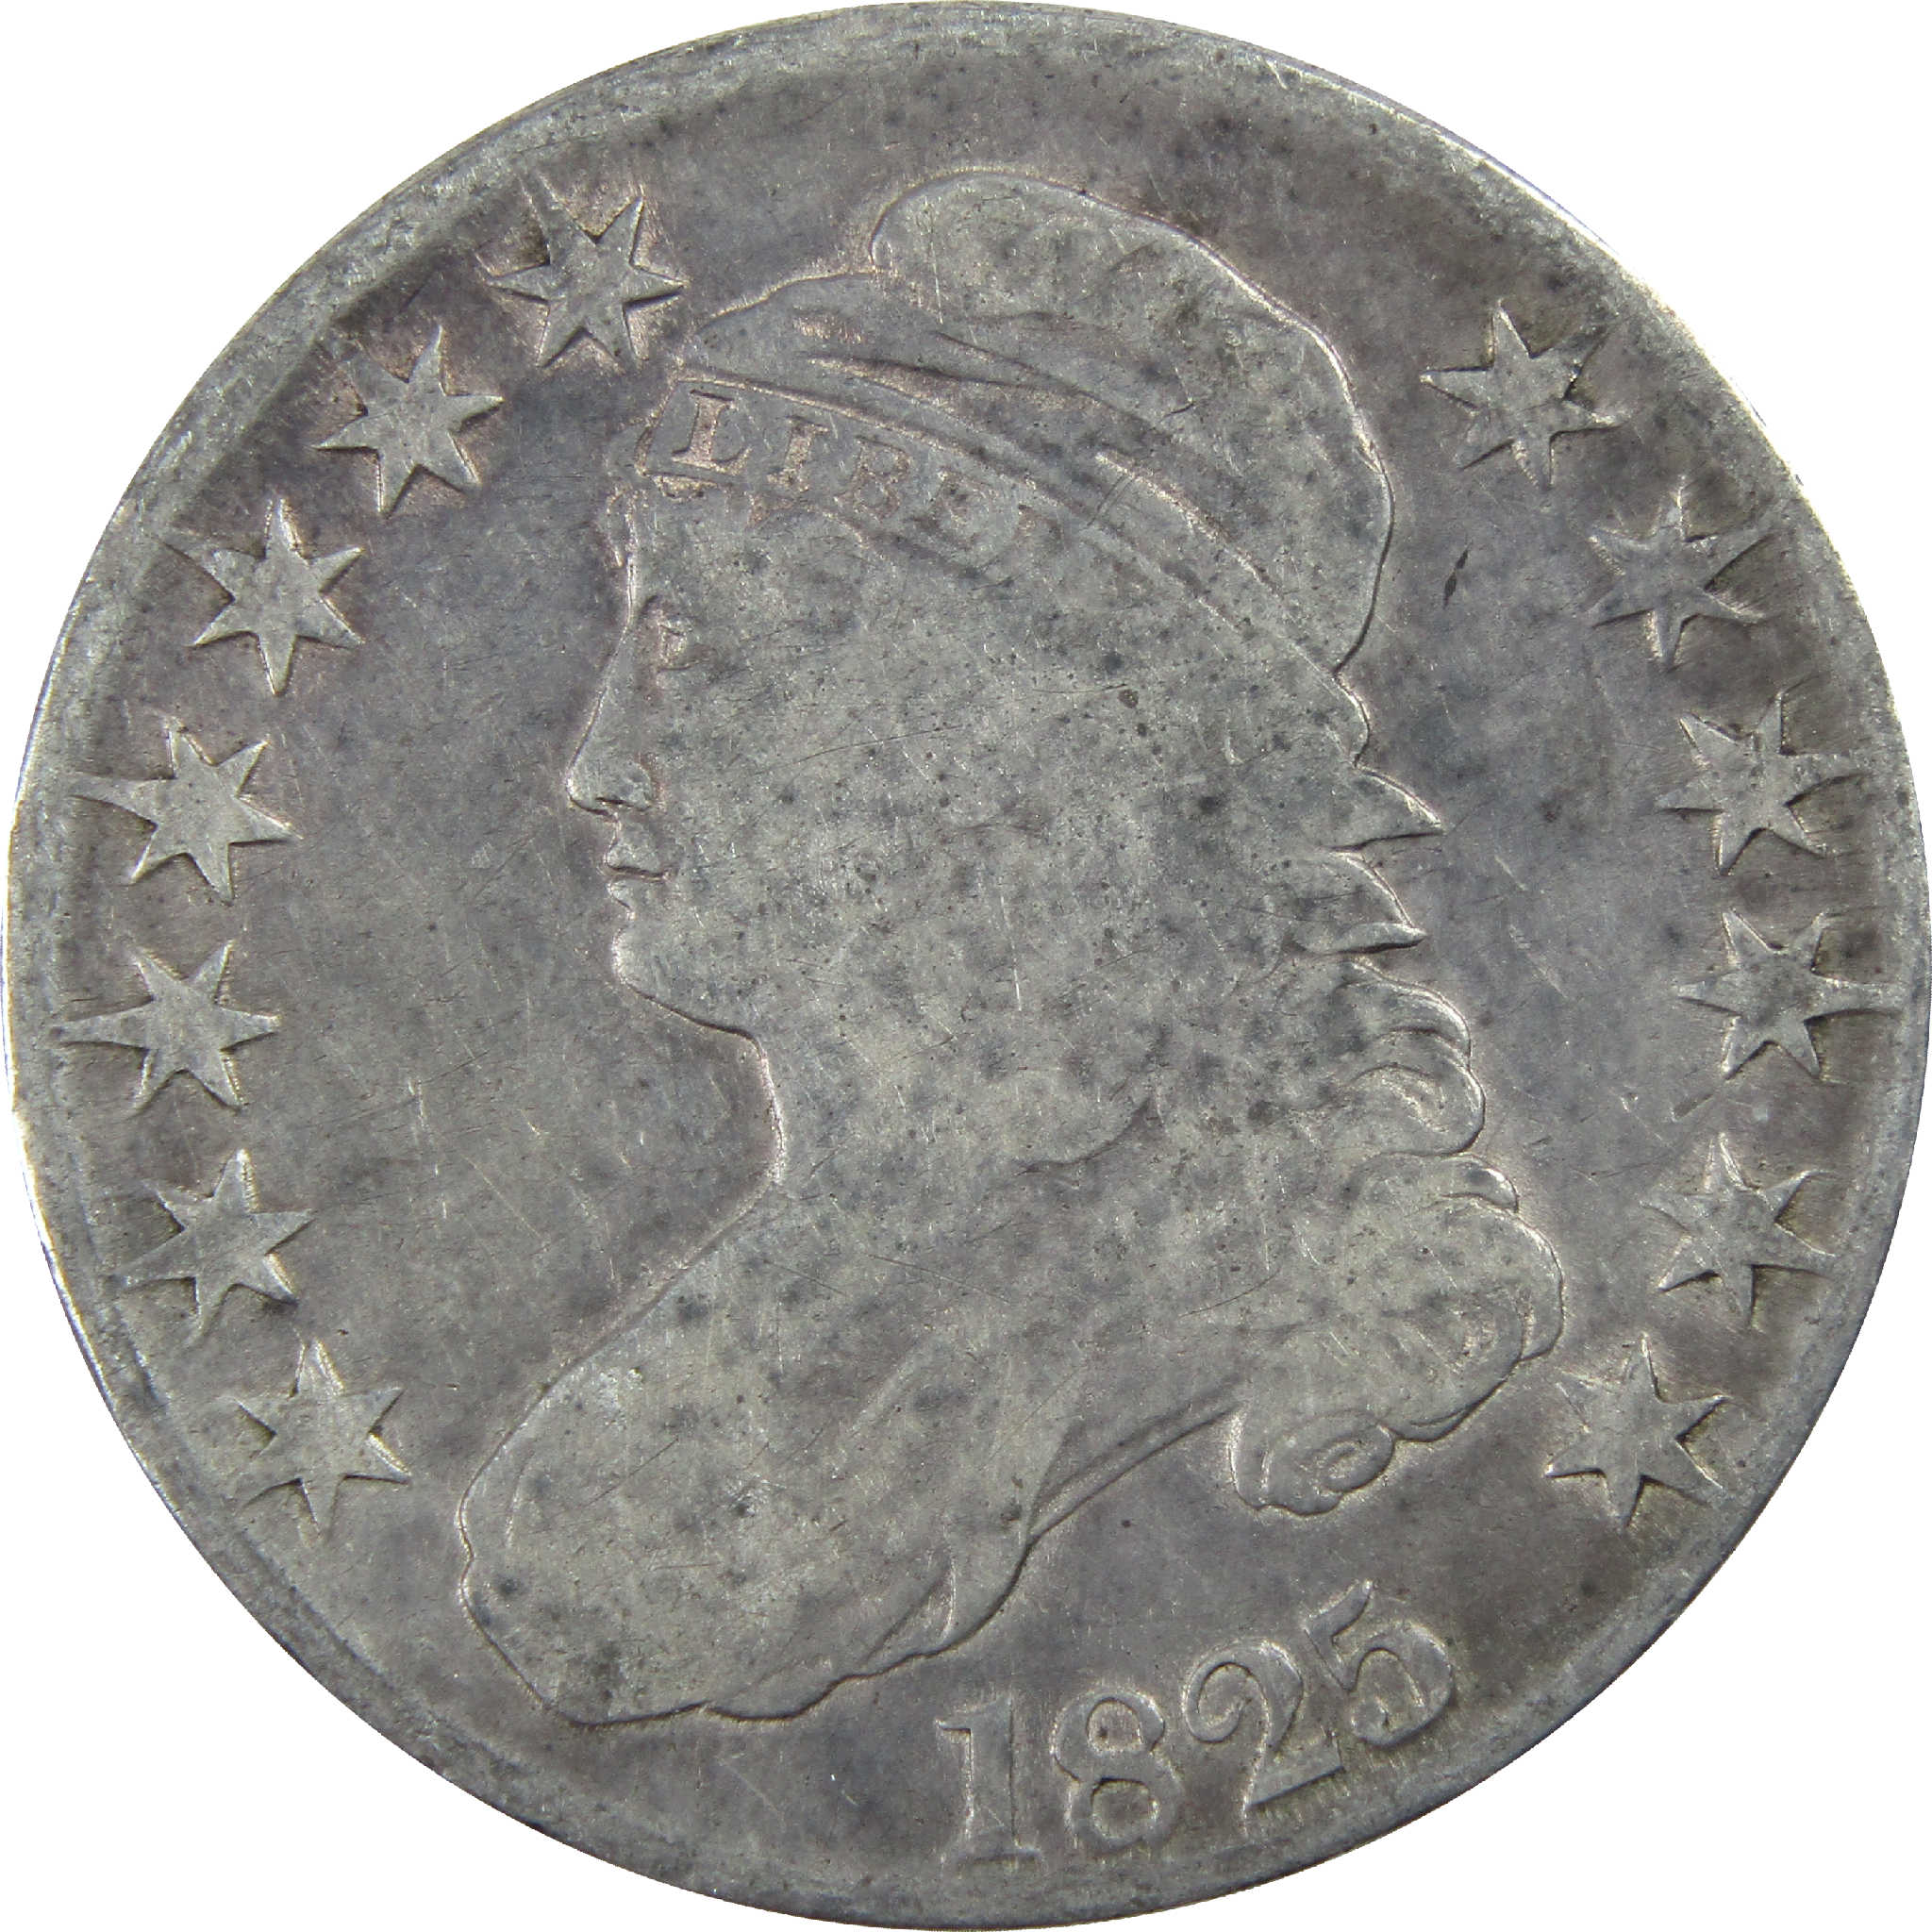 1825 Capped Bust Half Dollar AG About Good Silver 50c Coin SKU:I11749